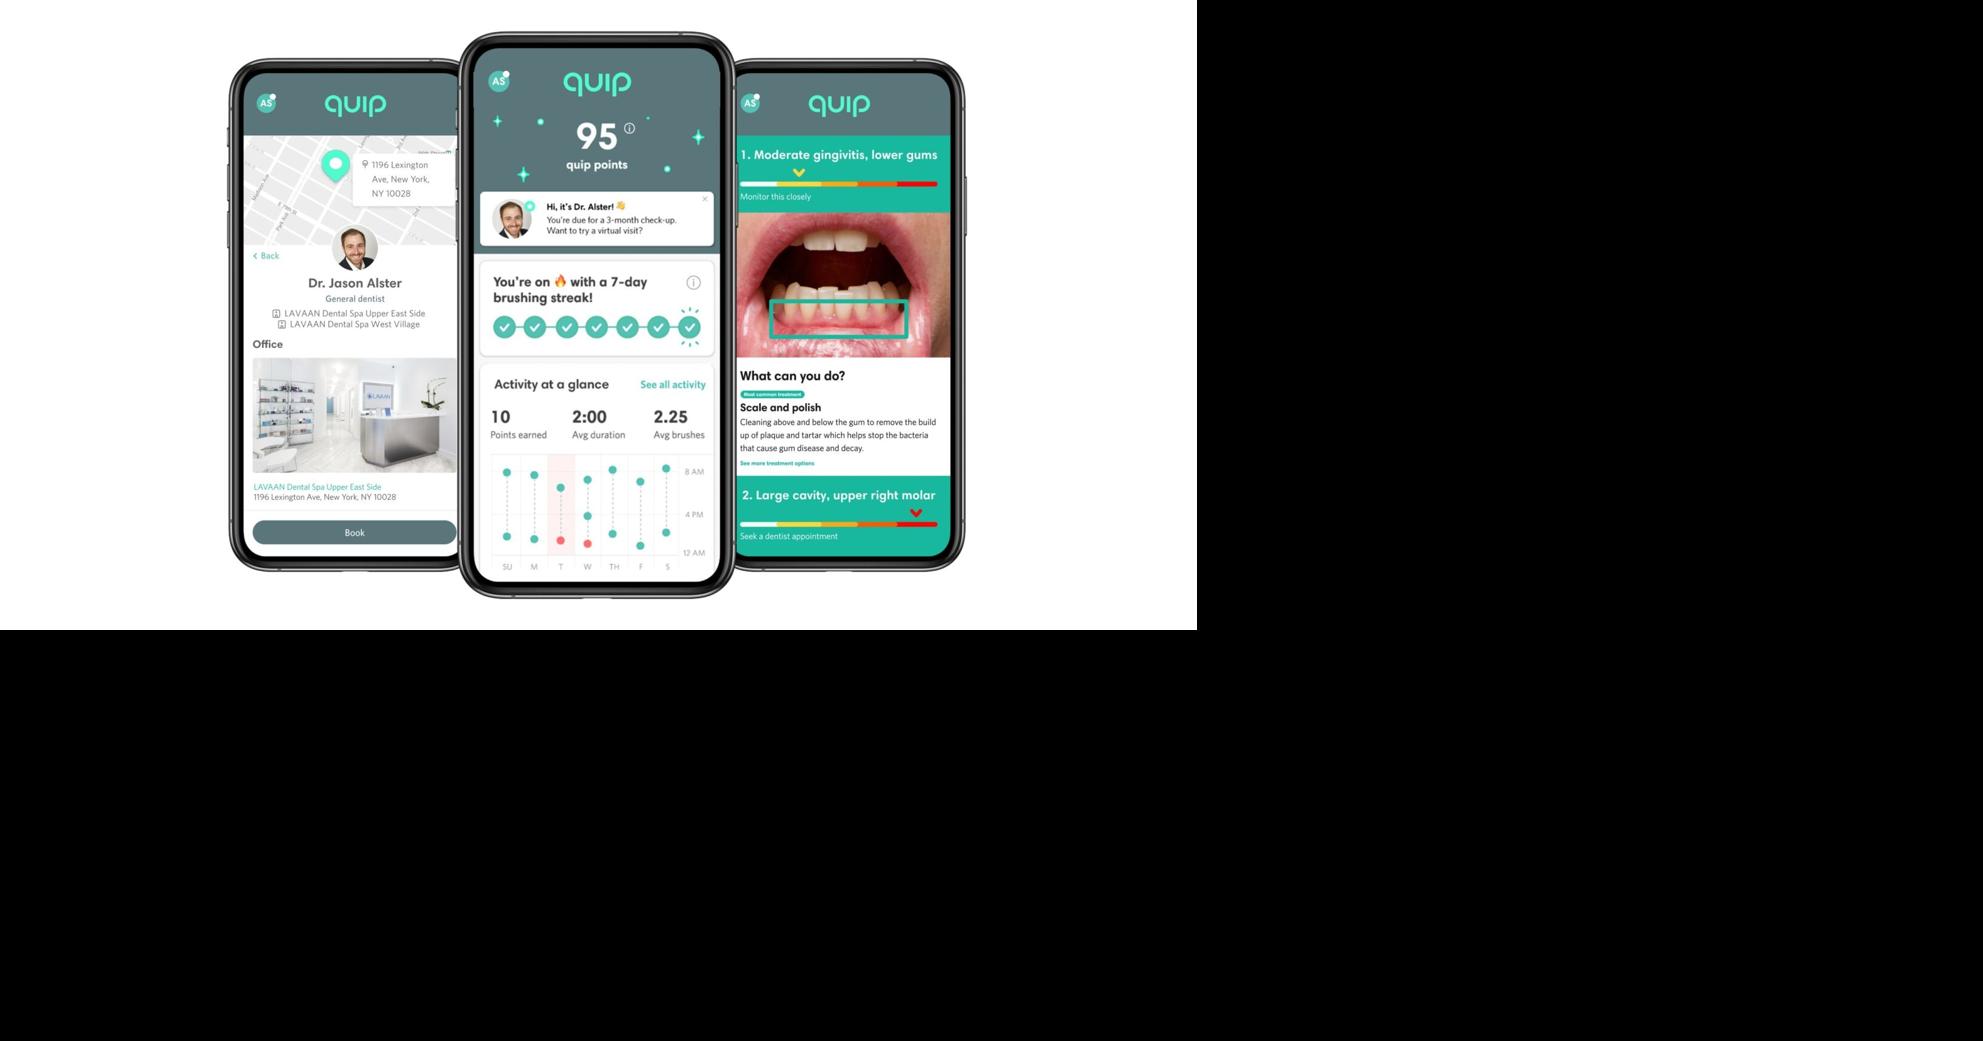 quip Acquires Teledentistry Company Toothpic to Become First 360-degree Oral Health Service and Improve Dental Care Access for Over 40 Million People | News